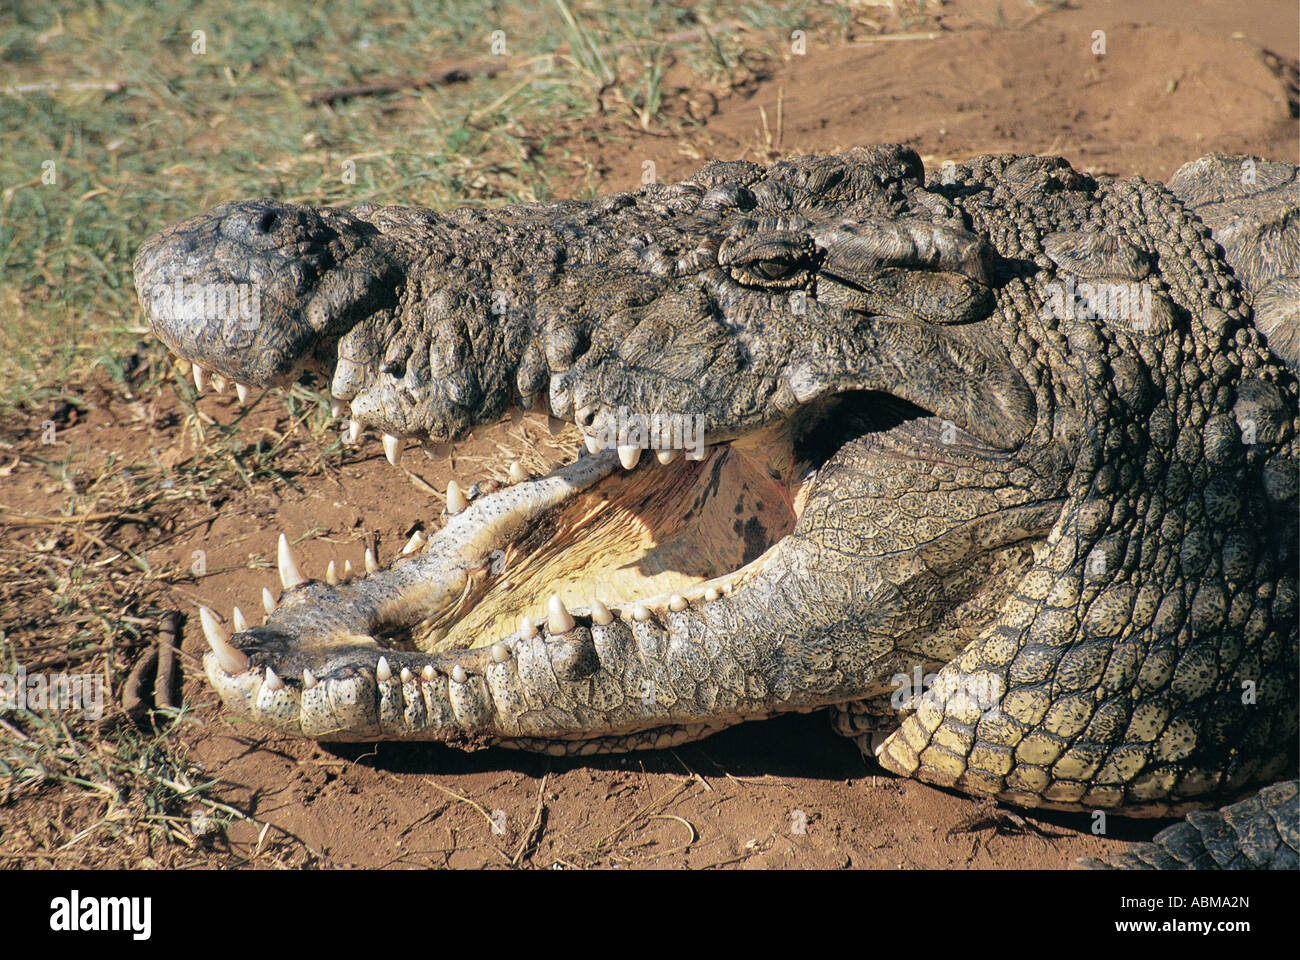 Nile Crocodile Croc World Farm Natal South Africa Its mouth is wide open showing the yellow lining Stock Photo